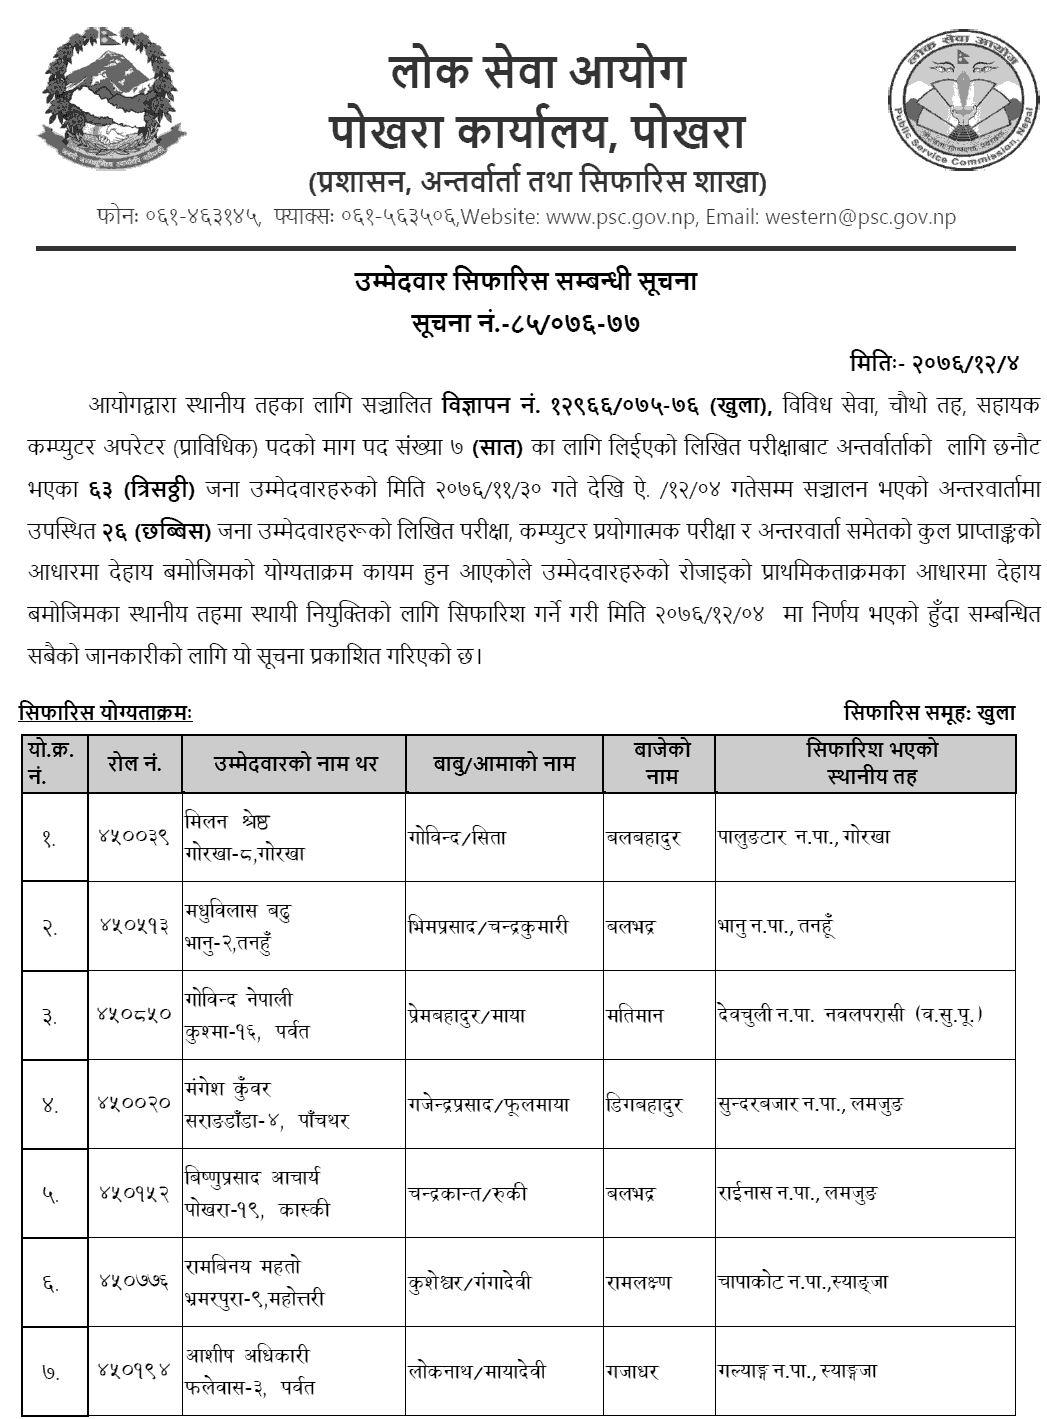 Lok Sewa Aayog Pokhara Local Level 4th Assistant Computer Operator Final Result and Sifaris